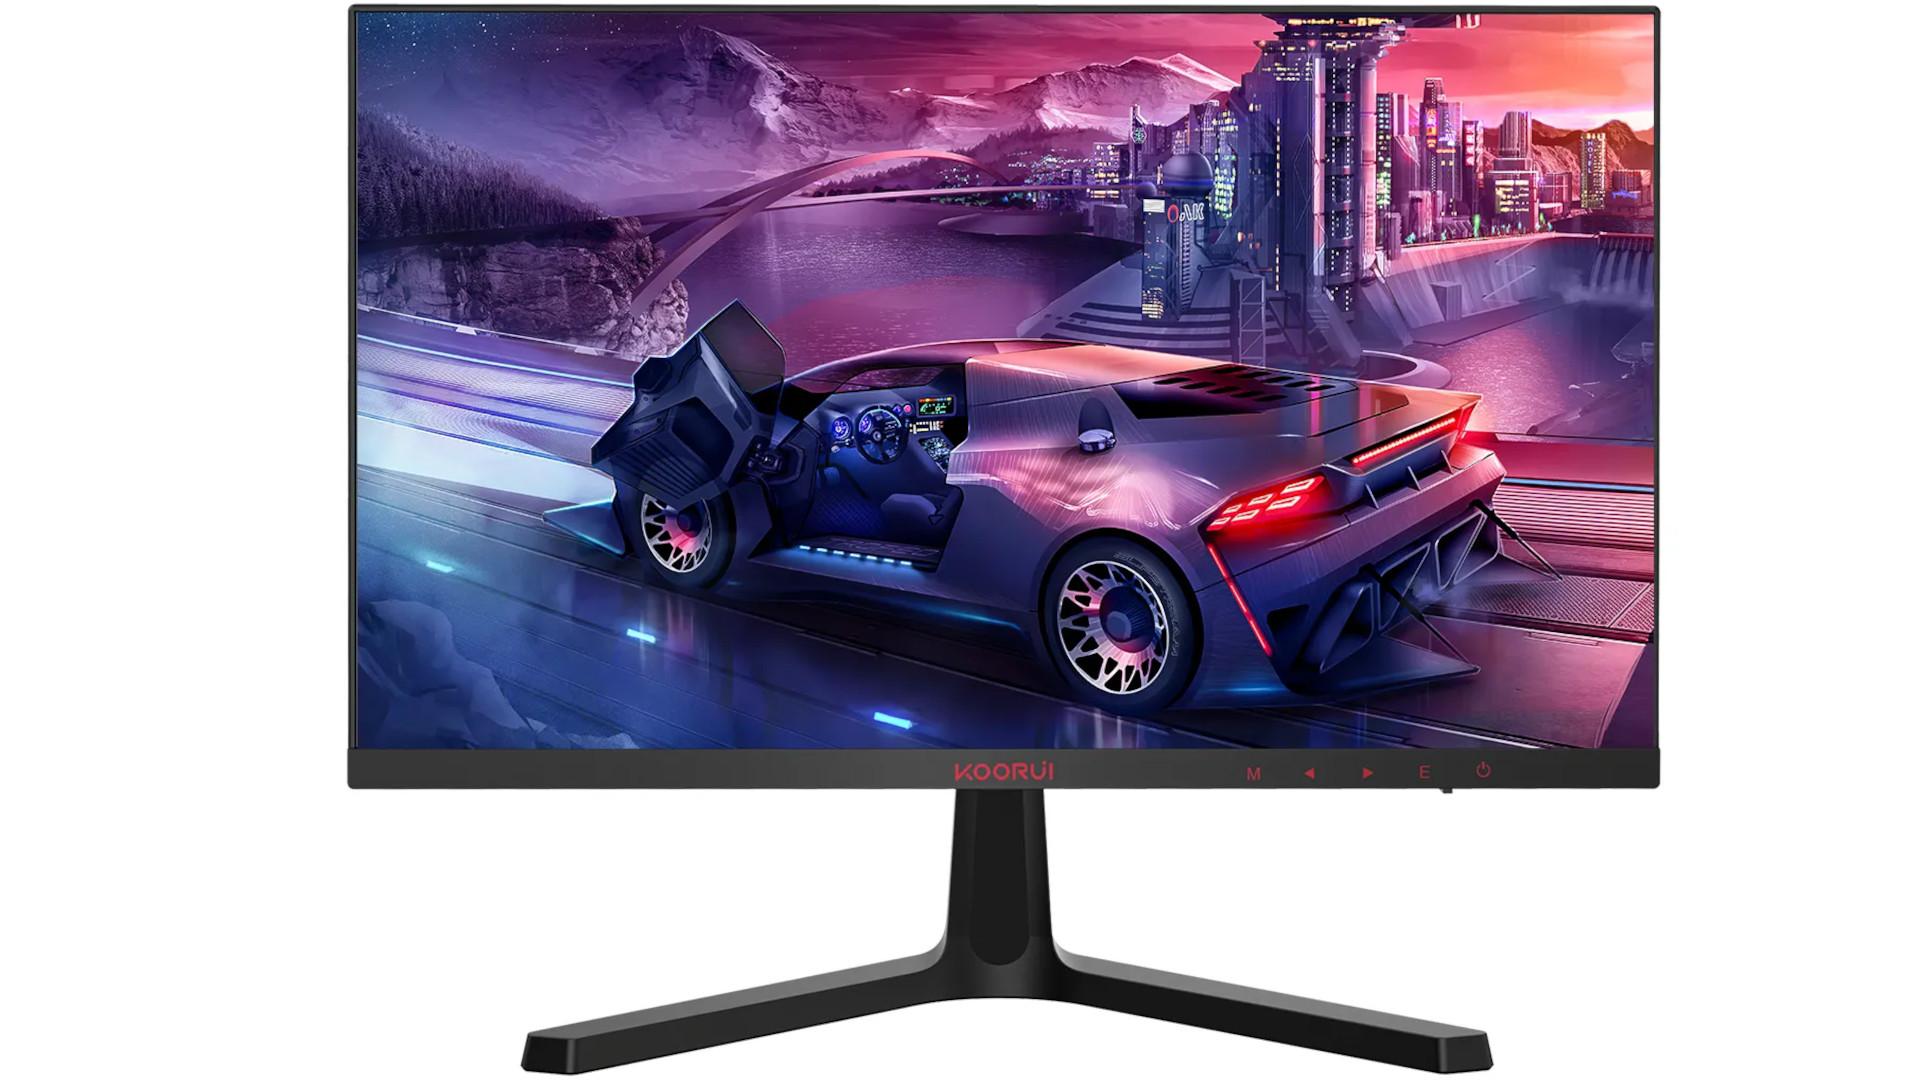 You are currently viewing KOORUI 24-Inch E4 FHD Monitor Review